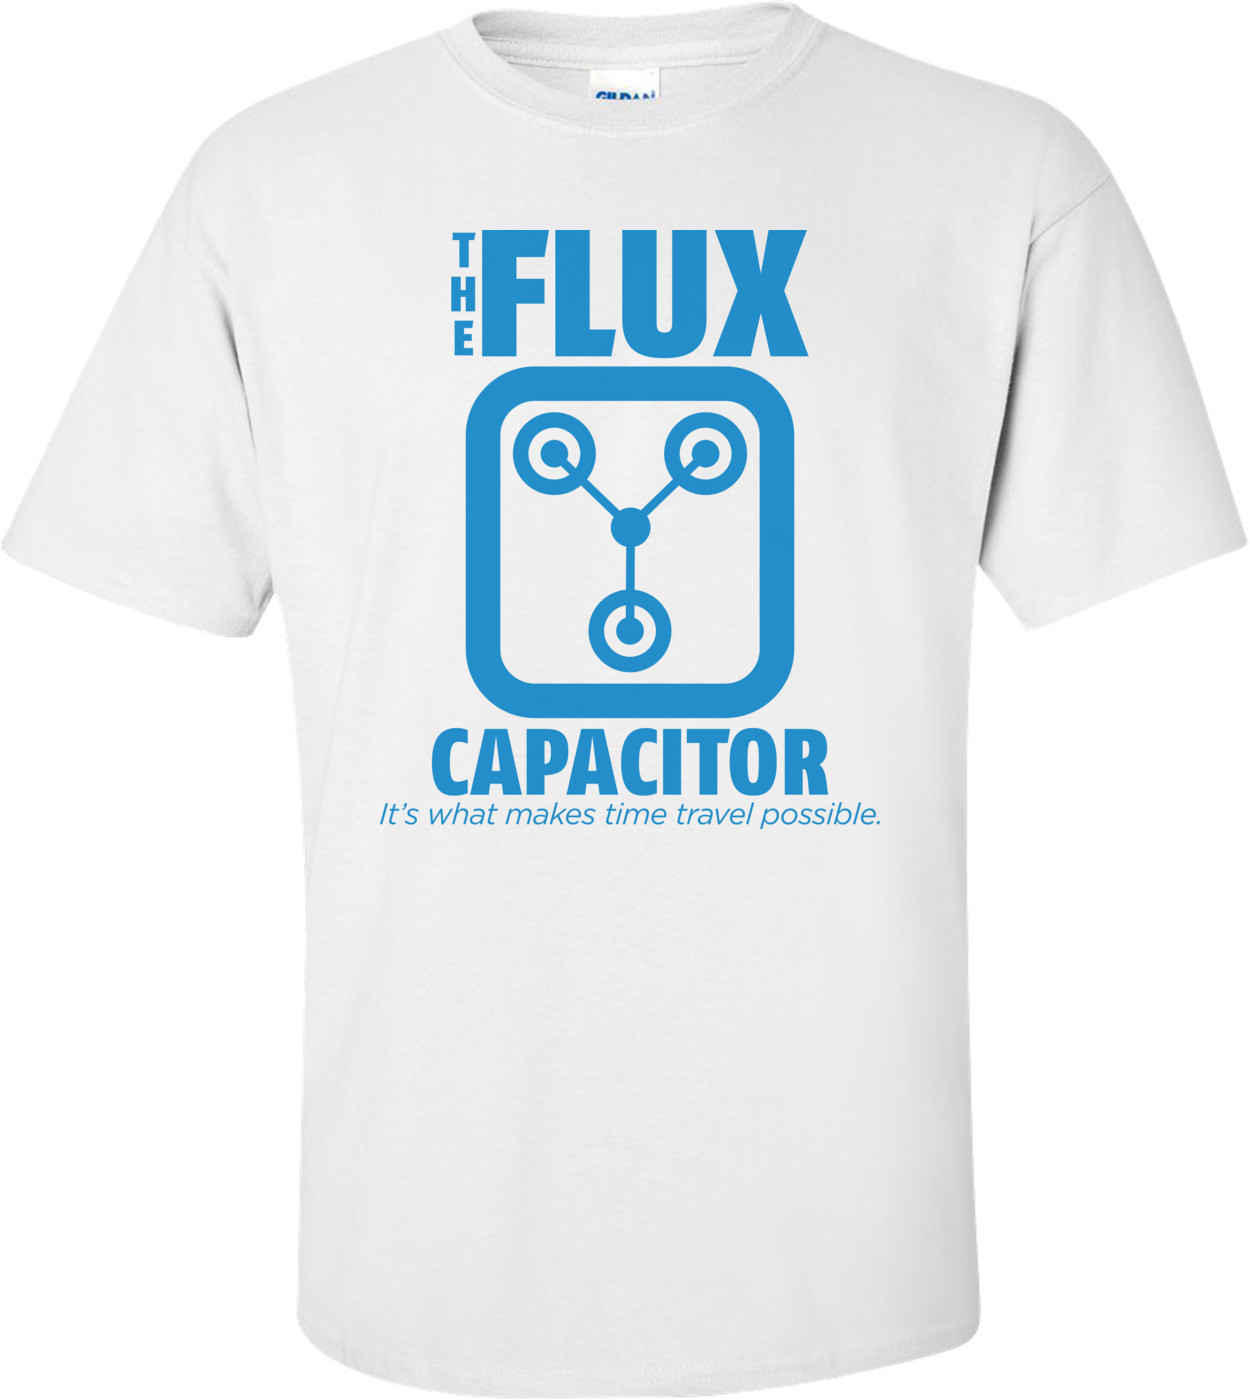 The Flux Capacitor Back To The Future